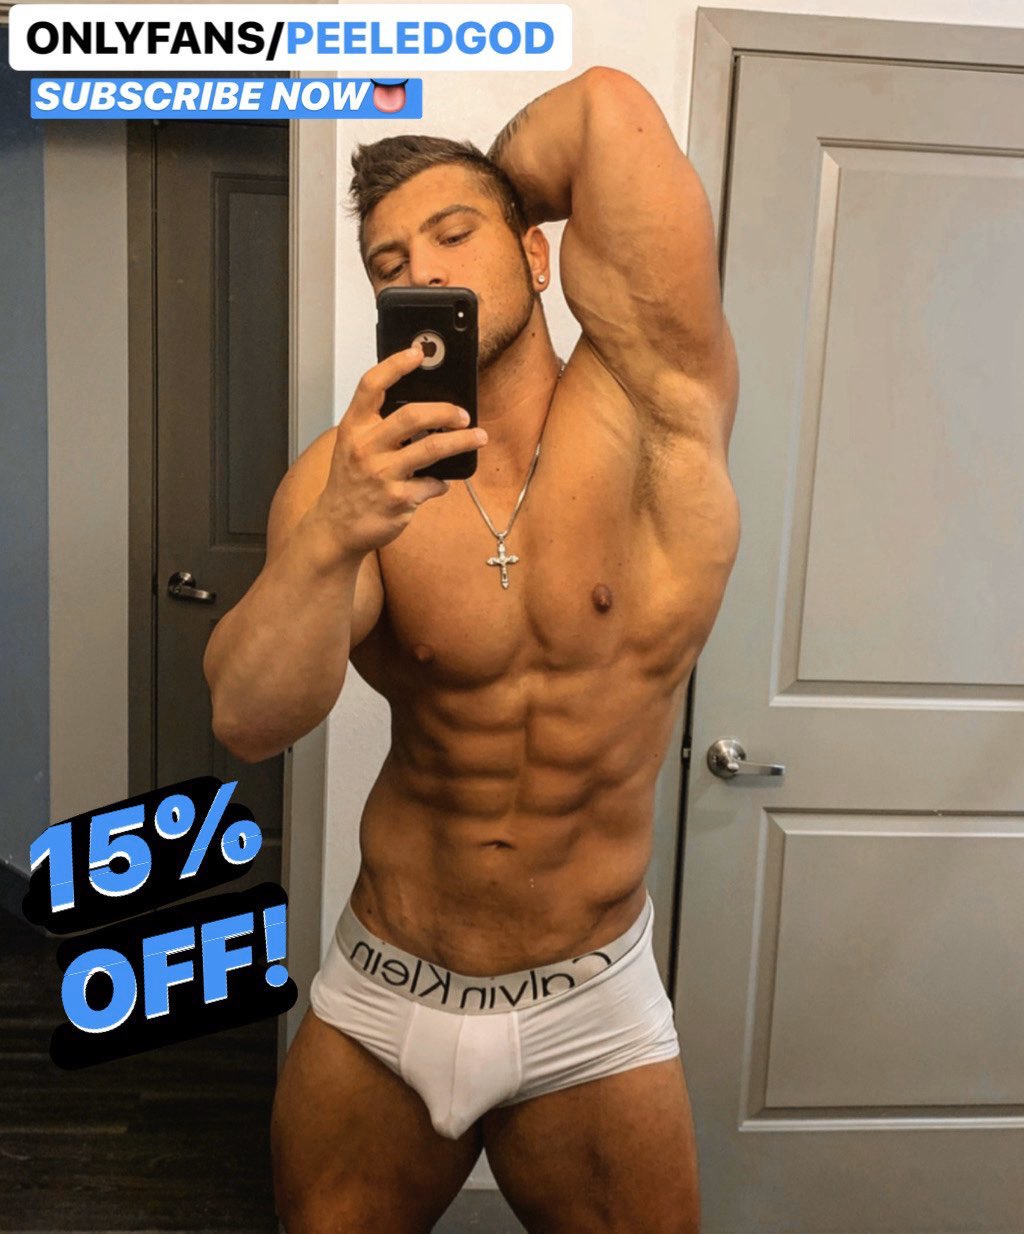 Subscription without onlyfans view posts Unlock Onlyfans